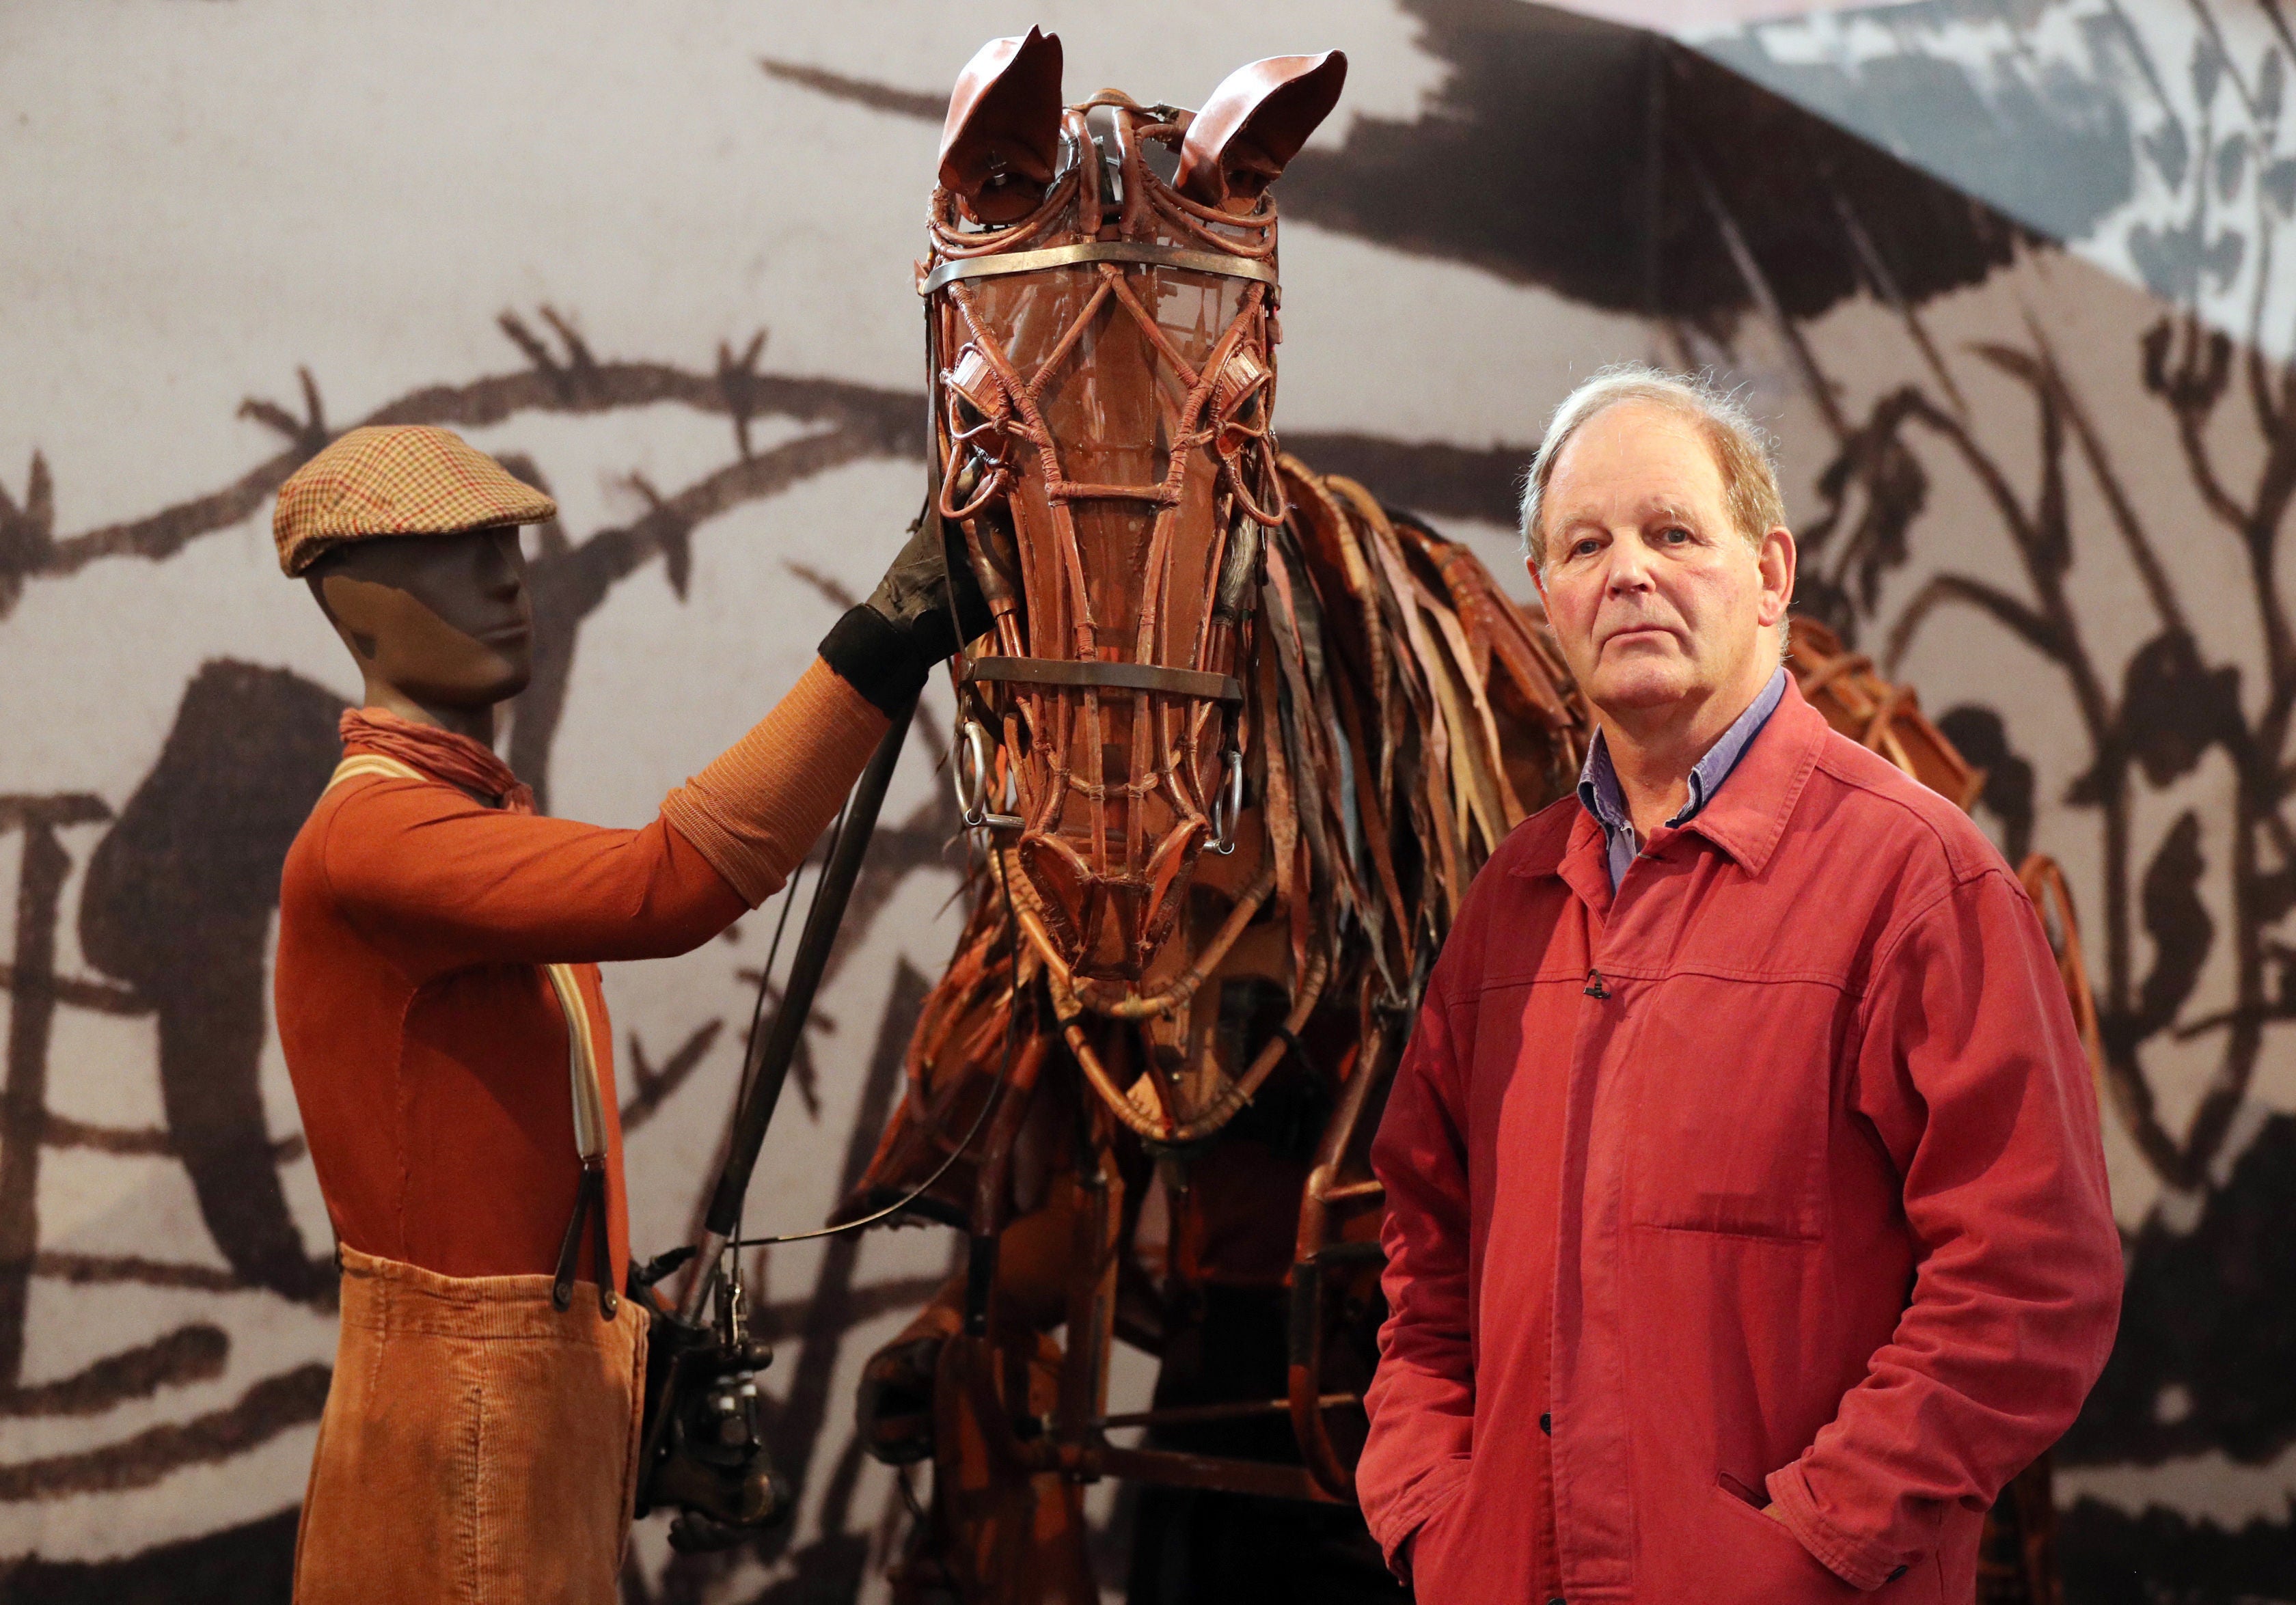 Author and playwright Michael Morpurgo, best known for children’s novels such as War Horse, opens the Michael Morpurgo: A Lifetime in Stories exhibition at the V&A Museum of Childhood, London (Jonathan Brady/PA)